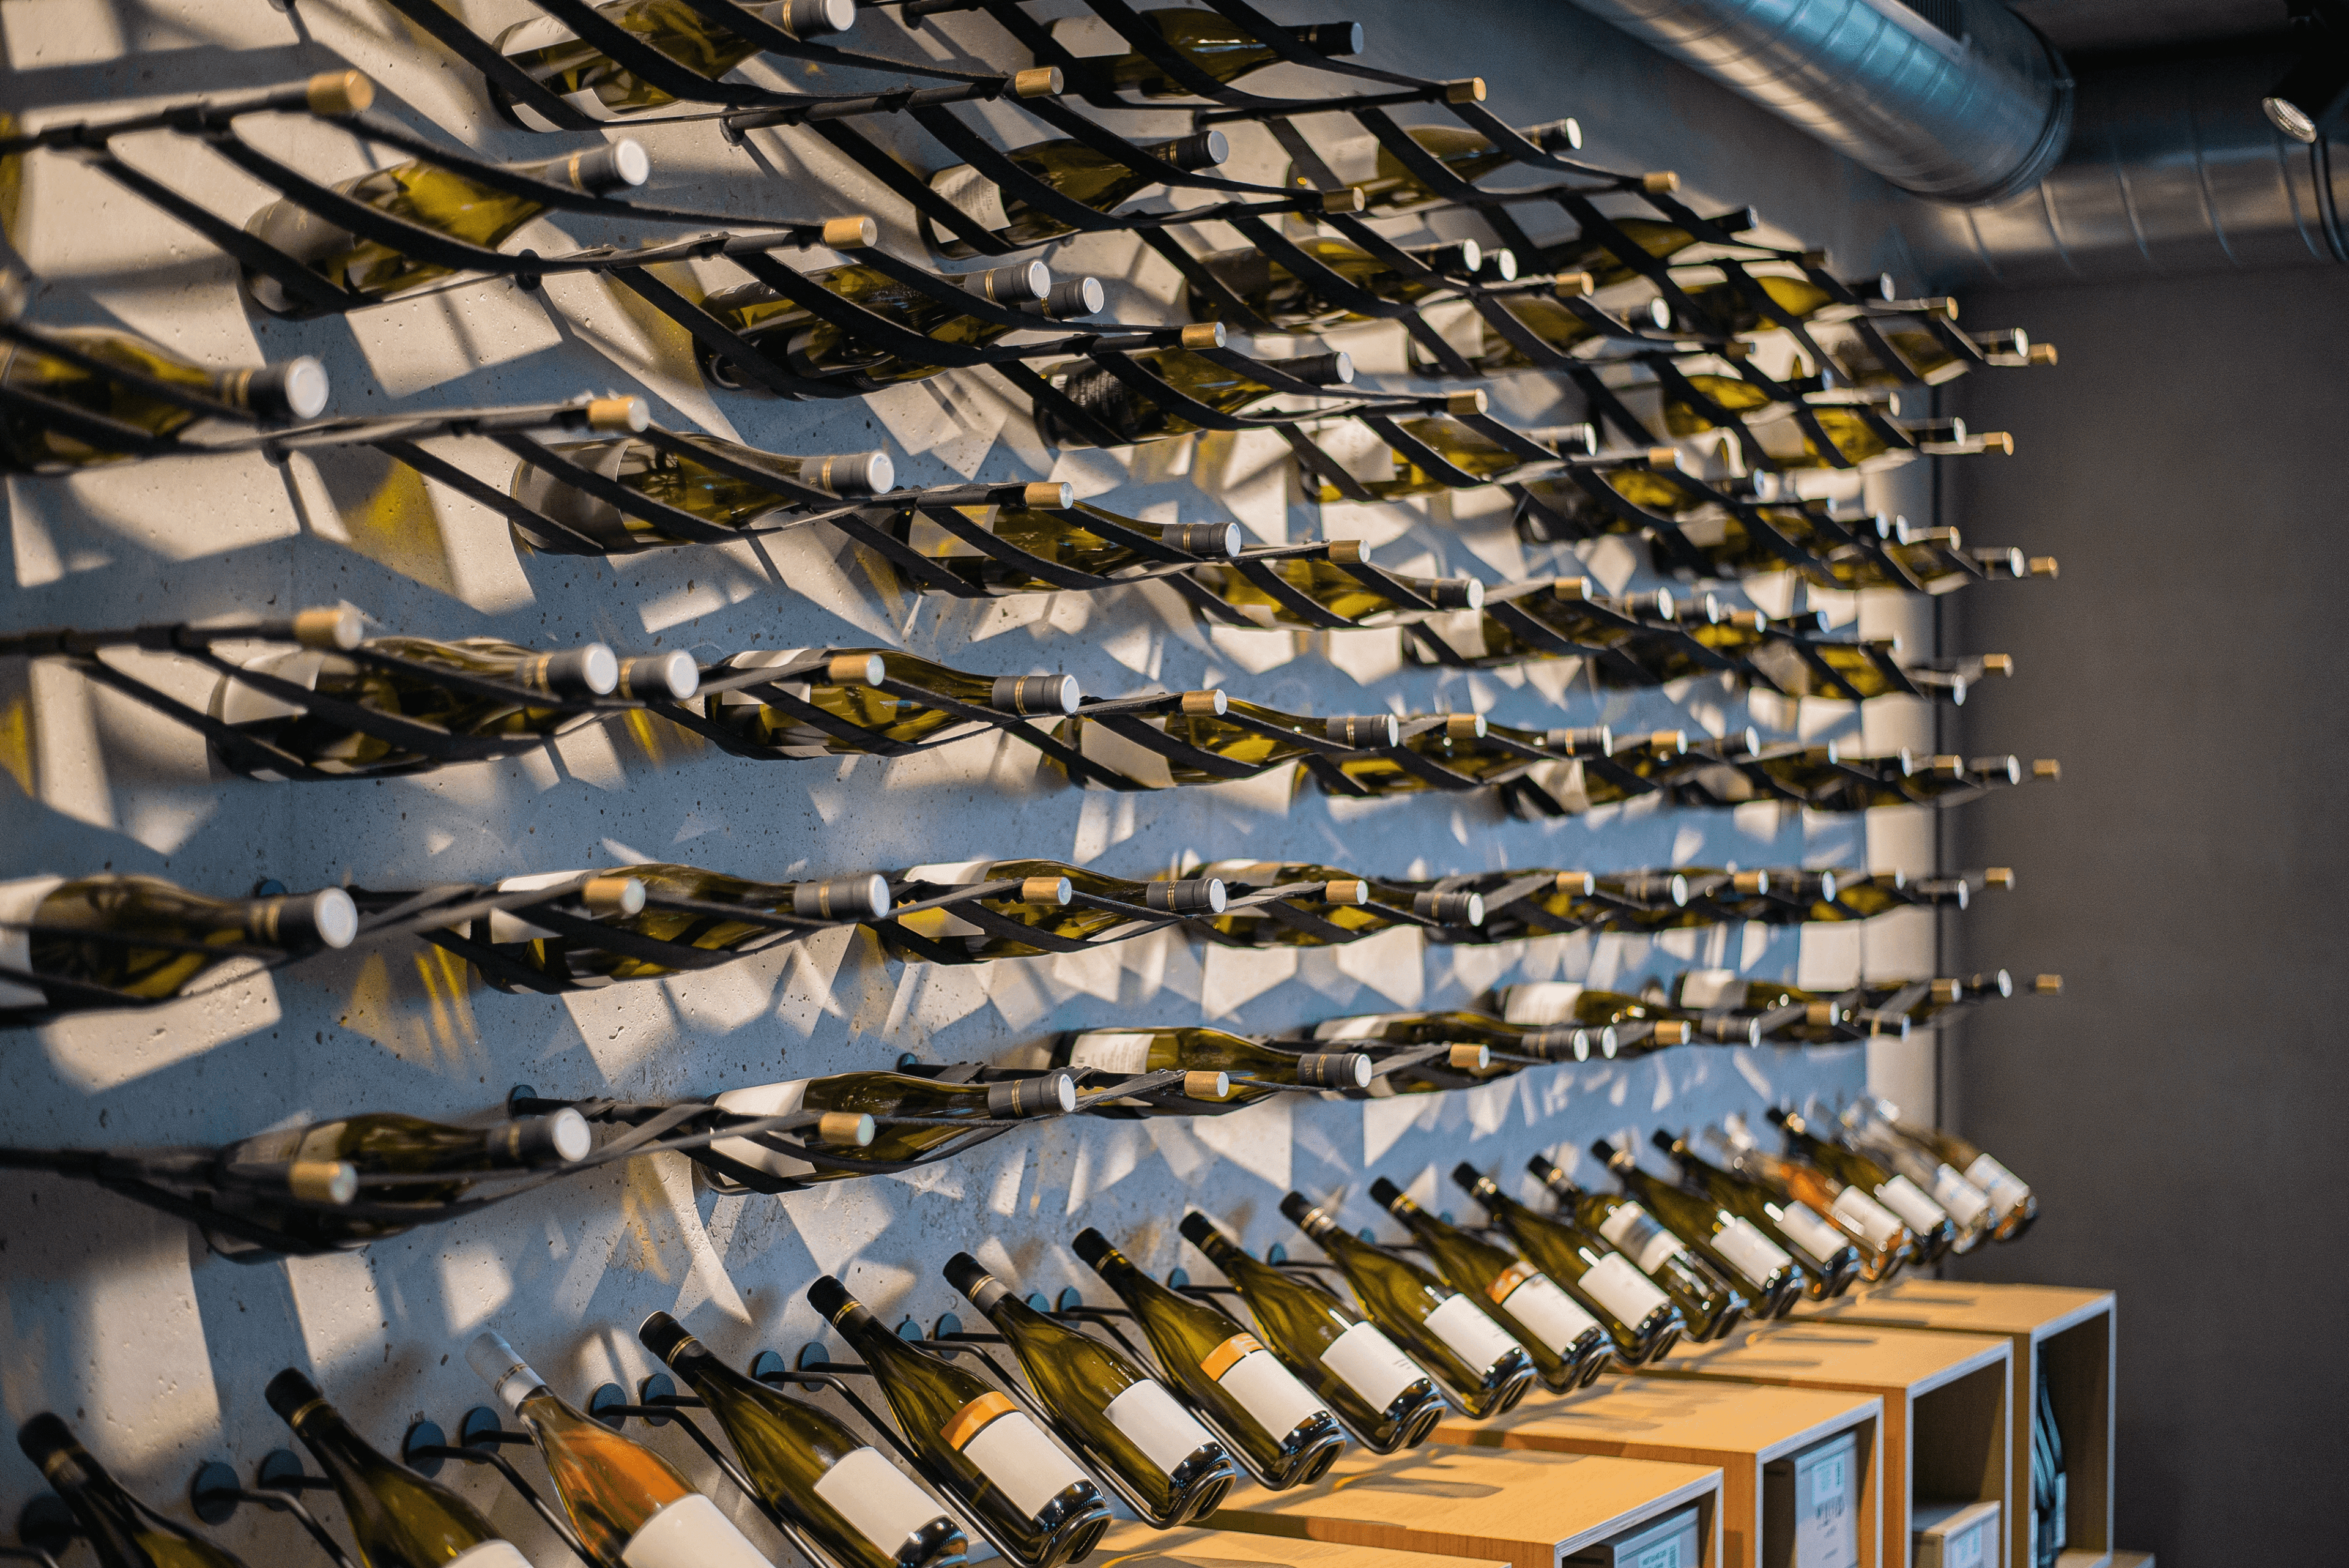 Picture of a wall rack full of wine bottles